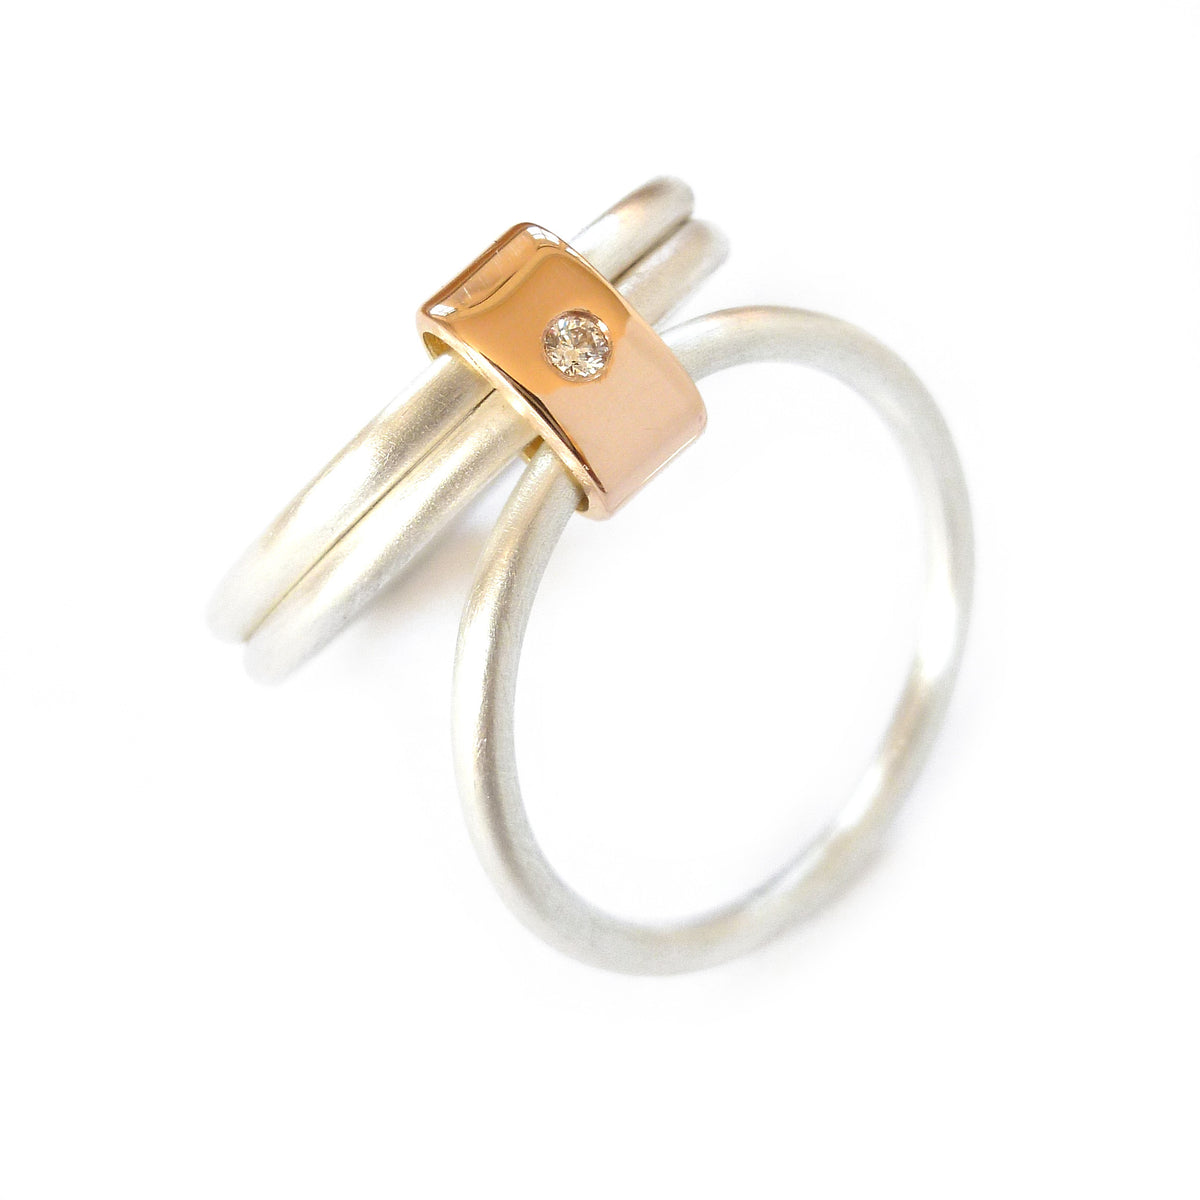 Unusual, bespoke and modern diamond wedding ring in silver and gold. Handmade by Sue Lane Contemporary Jewellery in Herefordshire, UK. Unique wedding ring.